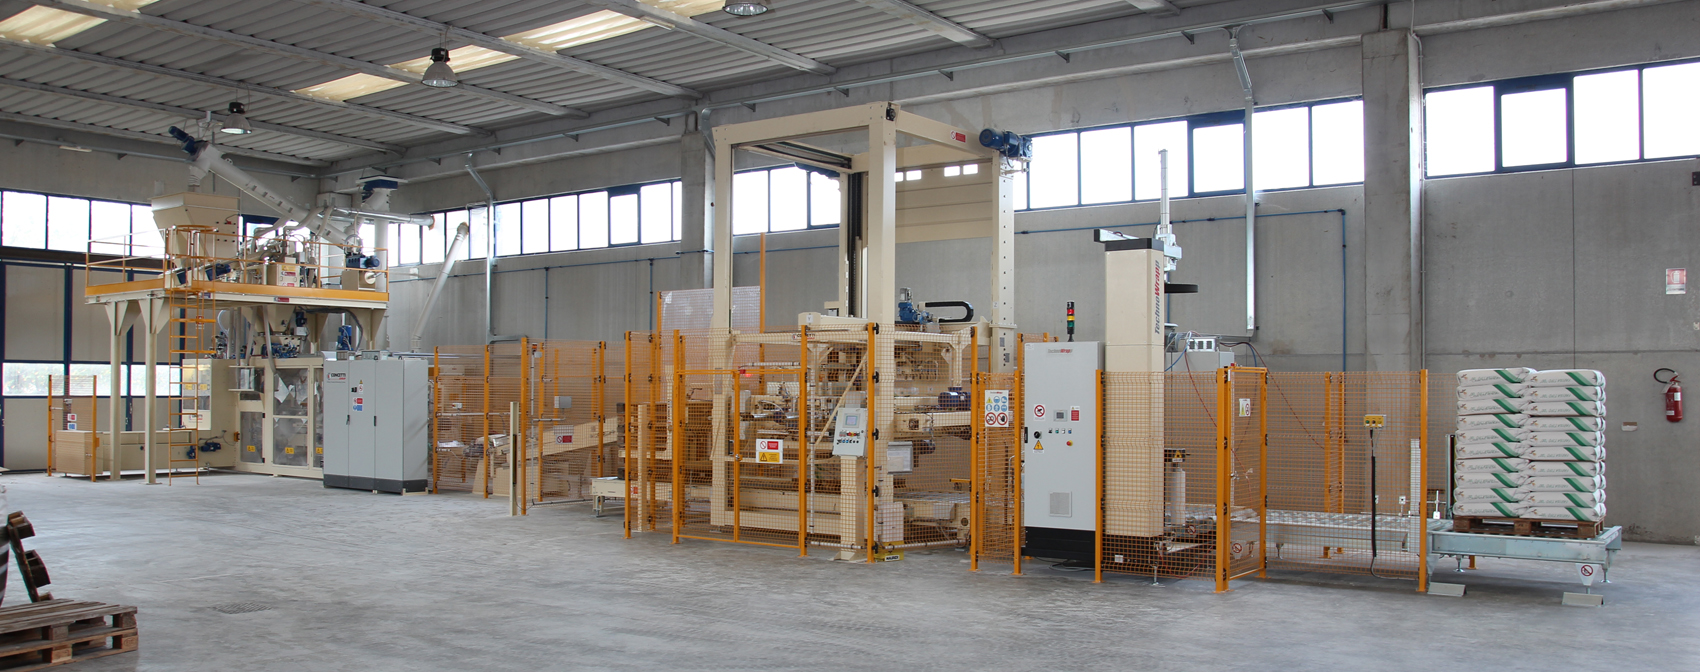 Image of automated packaging system machinery